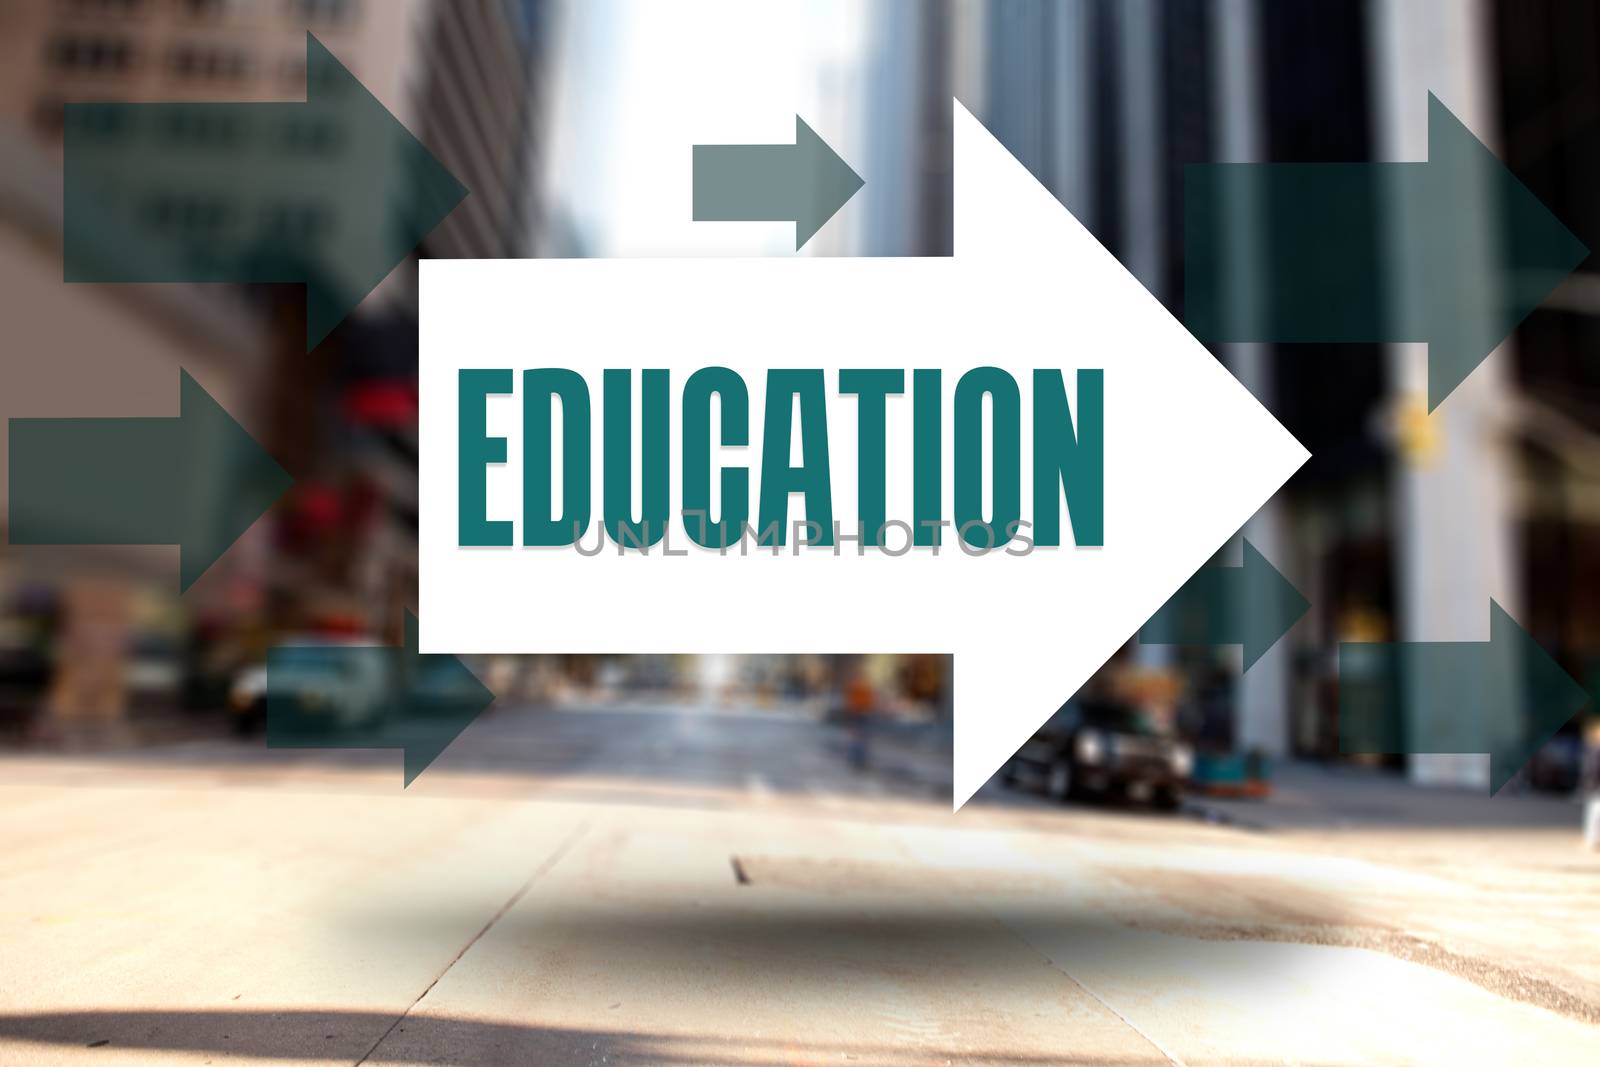 The word education and arrows against new york street